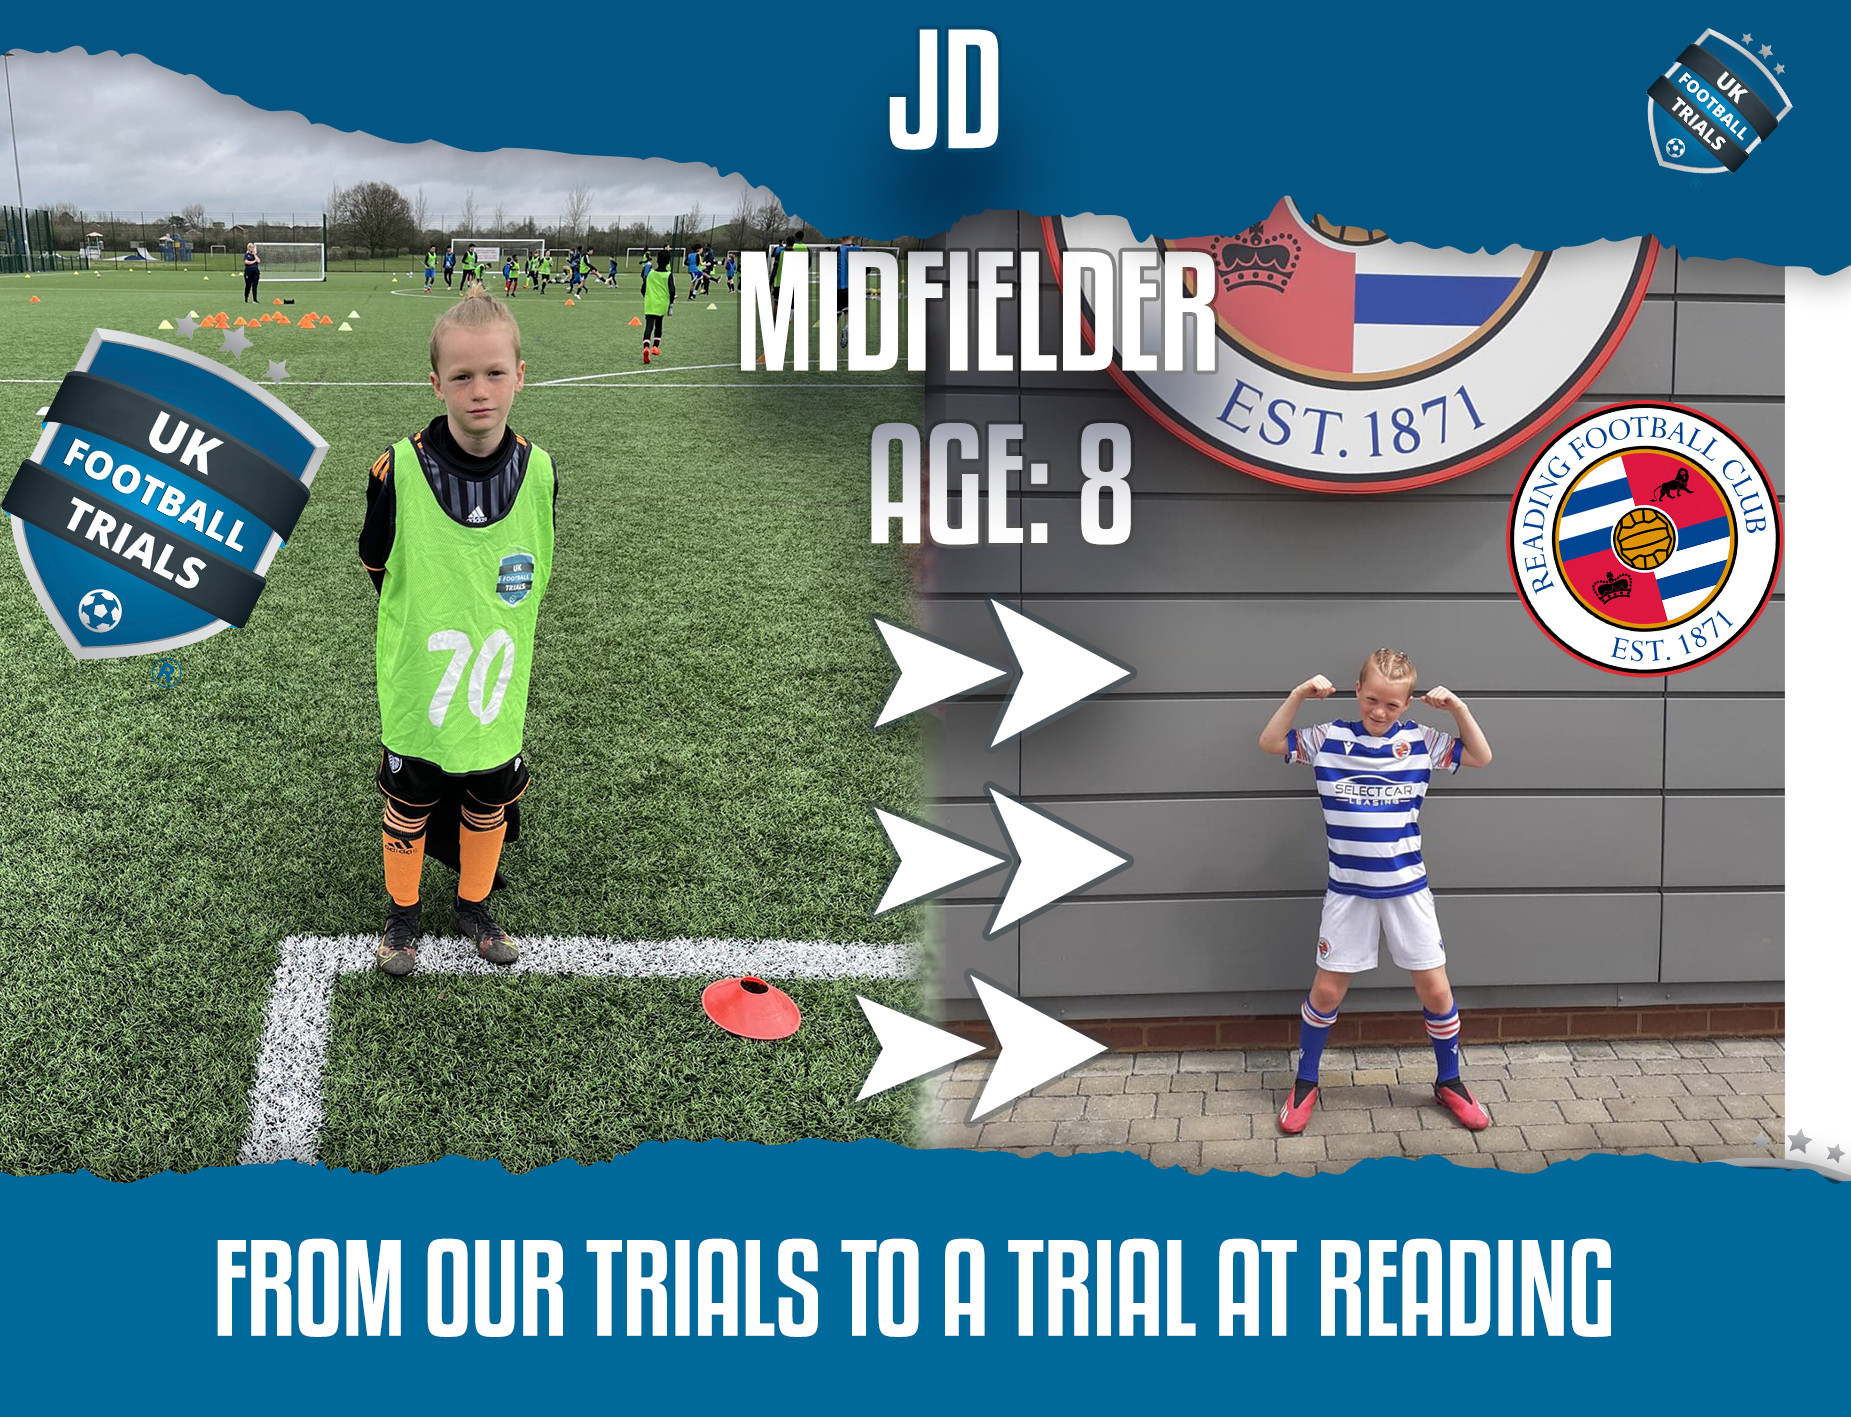 JD - Aged 8 - Trial at Reading FC